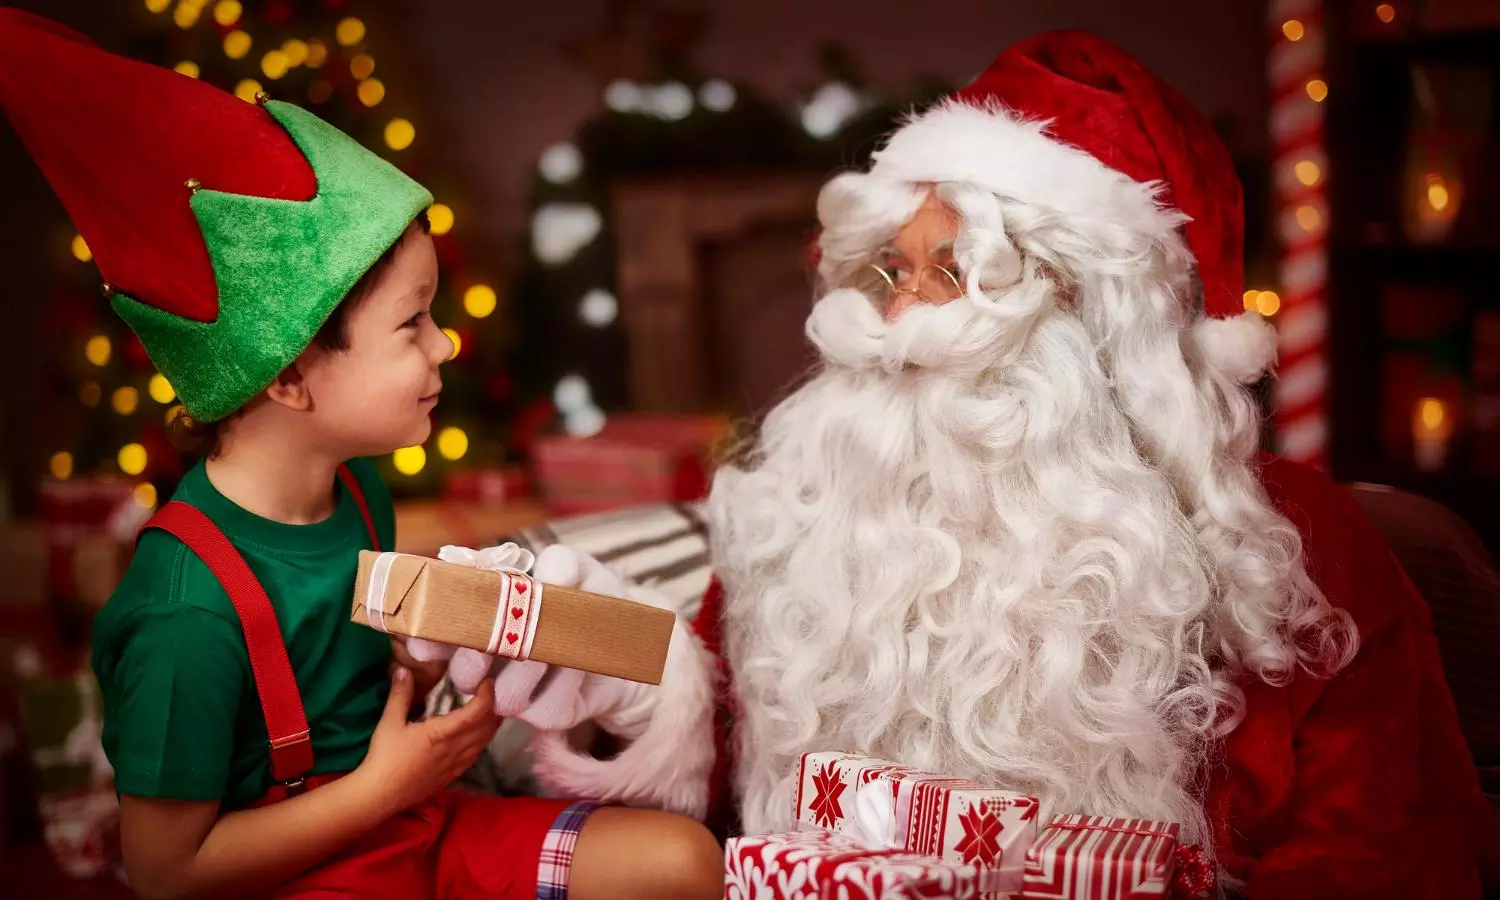 Ho-Ho-Ho! Where does the legend of Santa Claus come from?